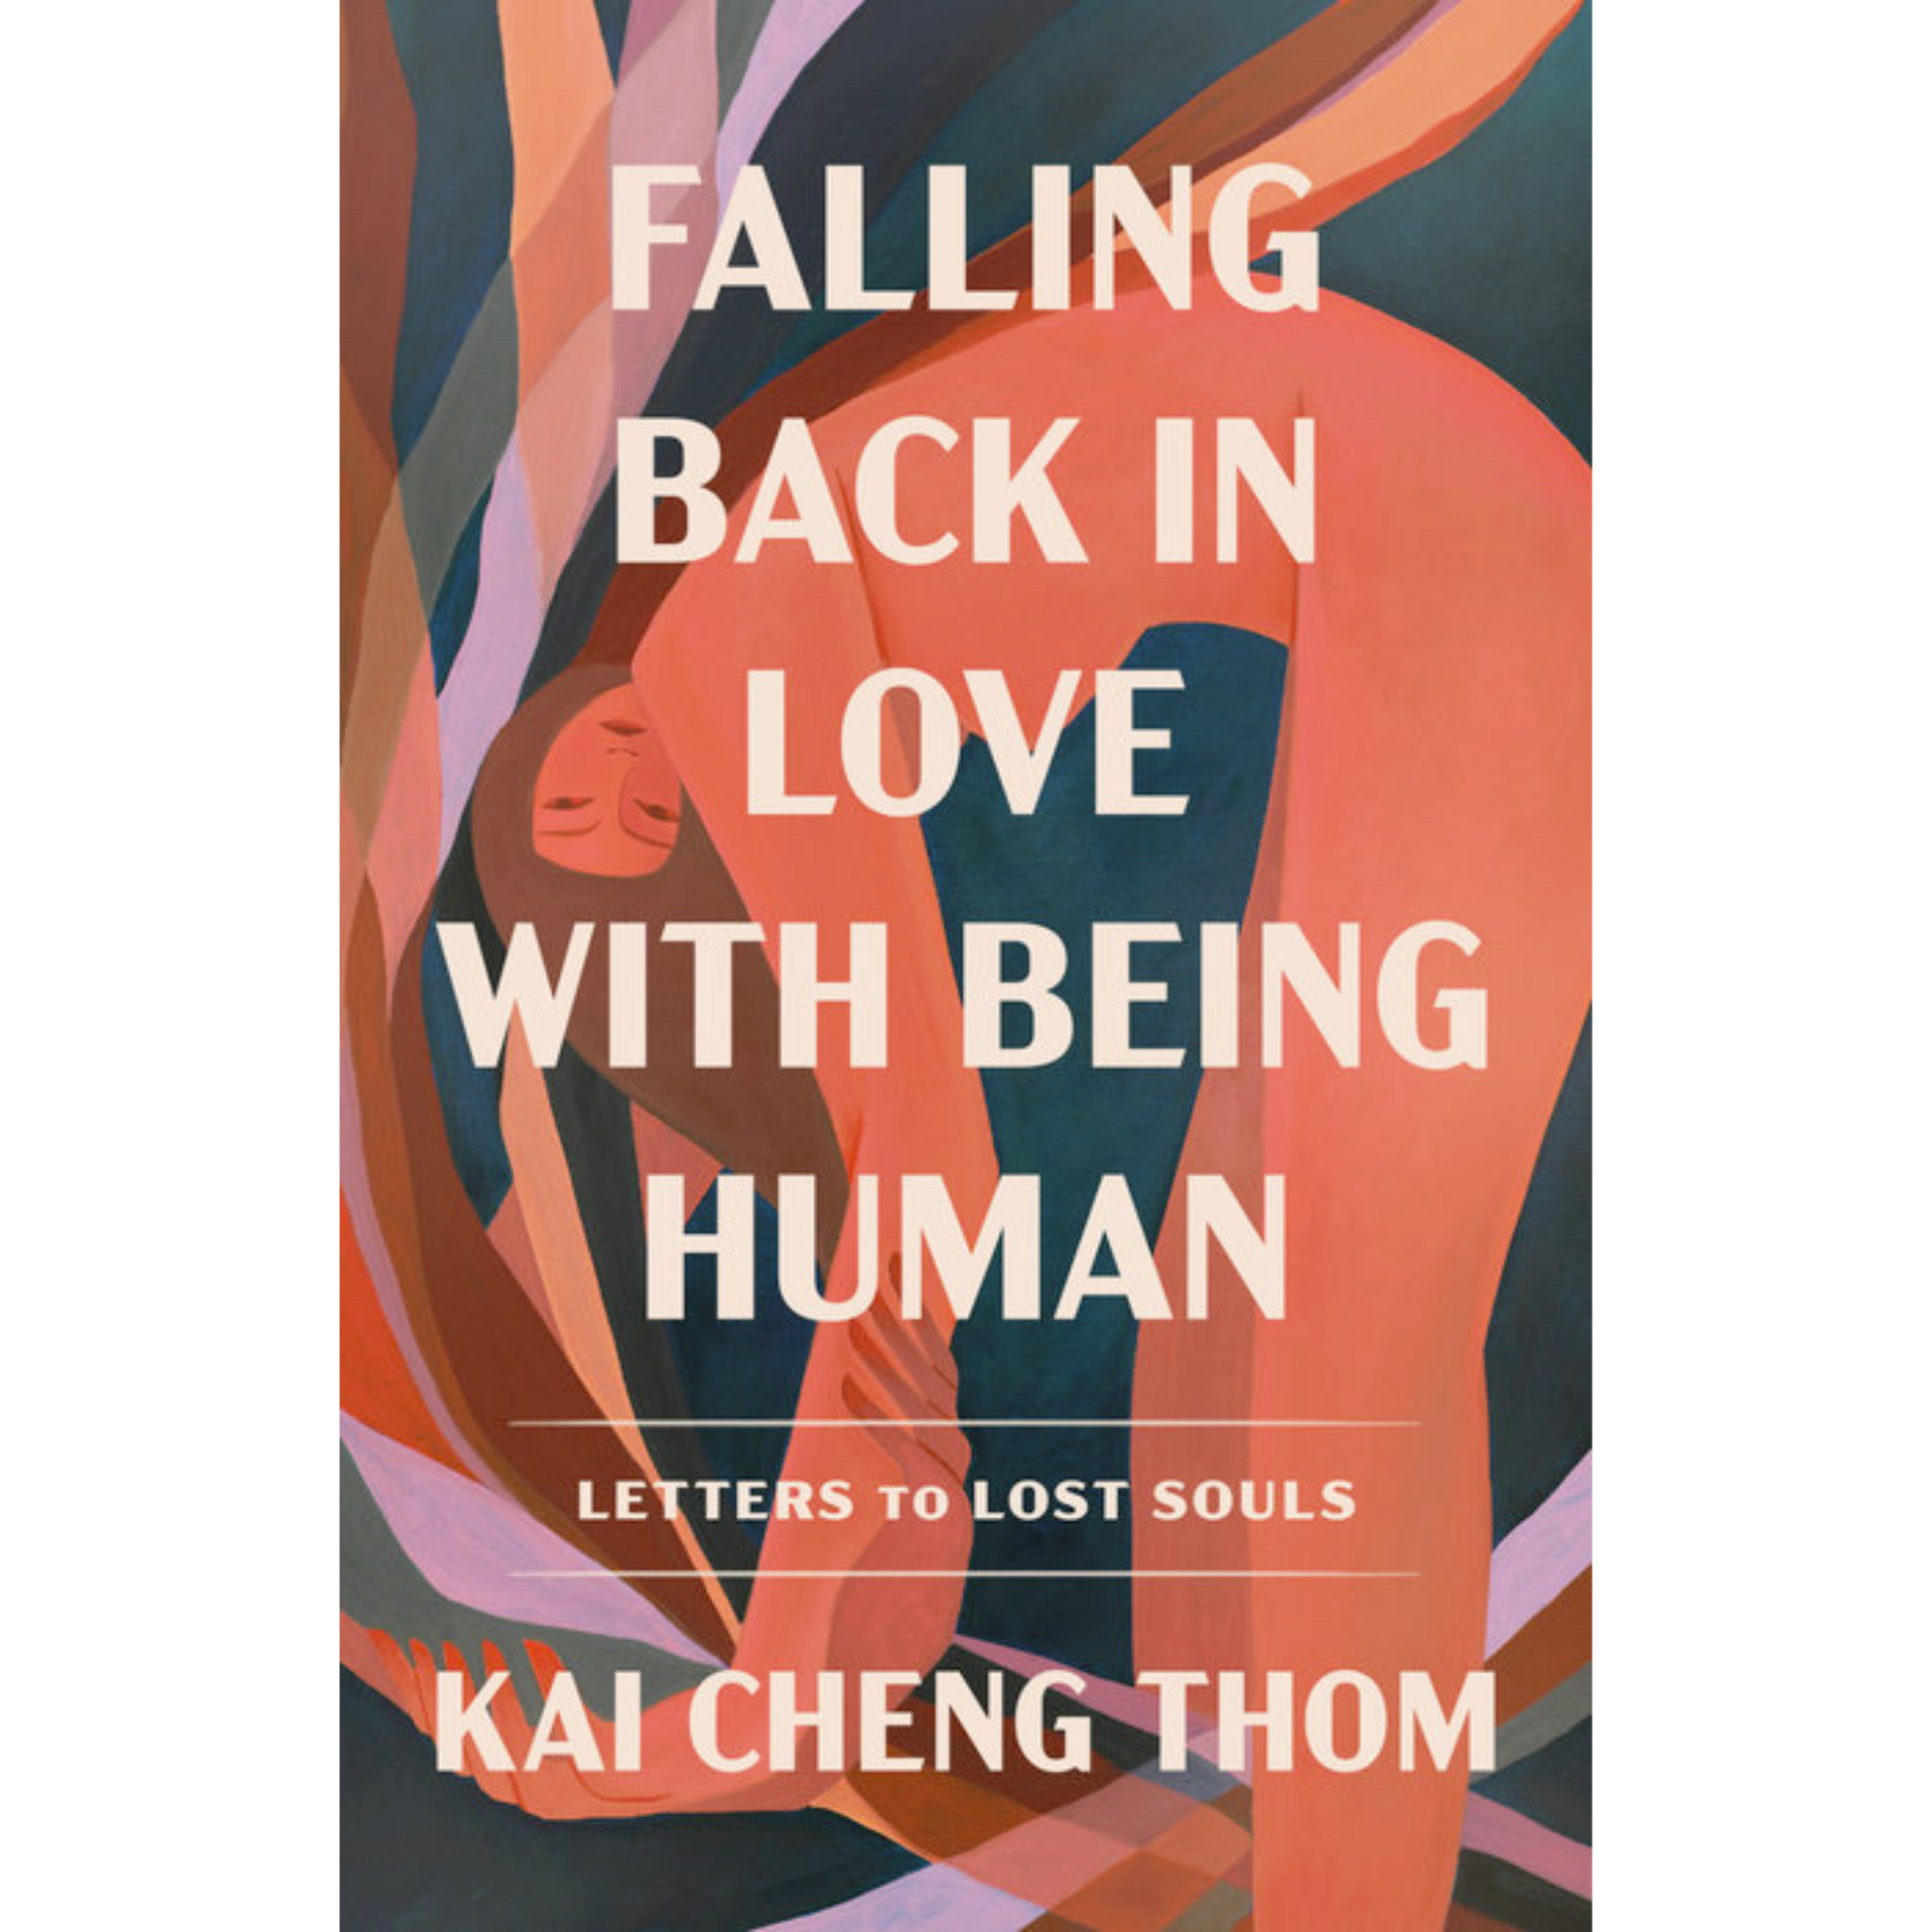 falling back in love with being human kai cheng thom